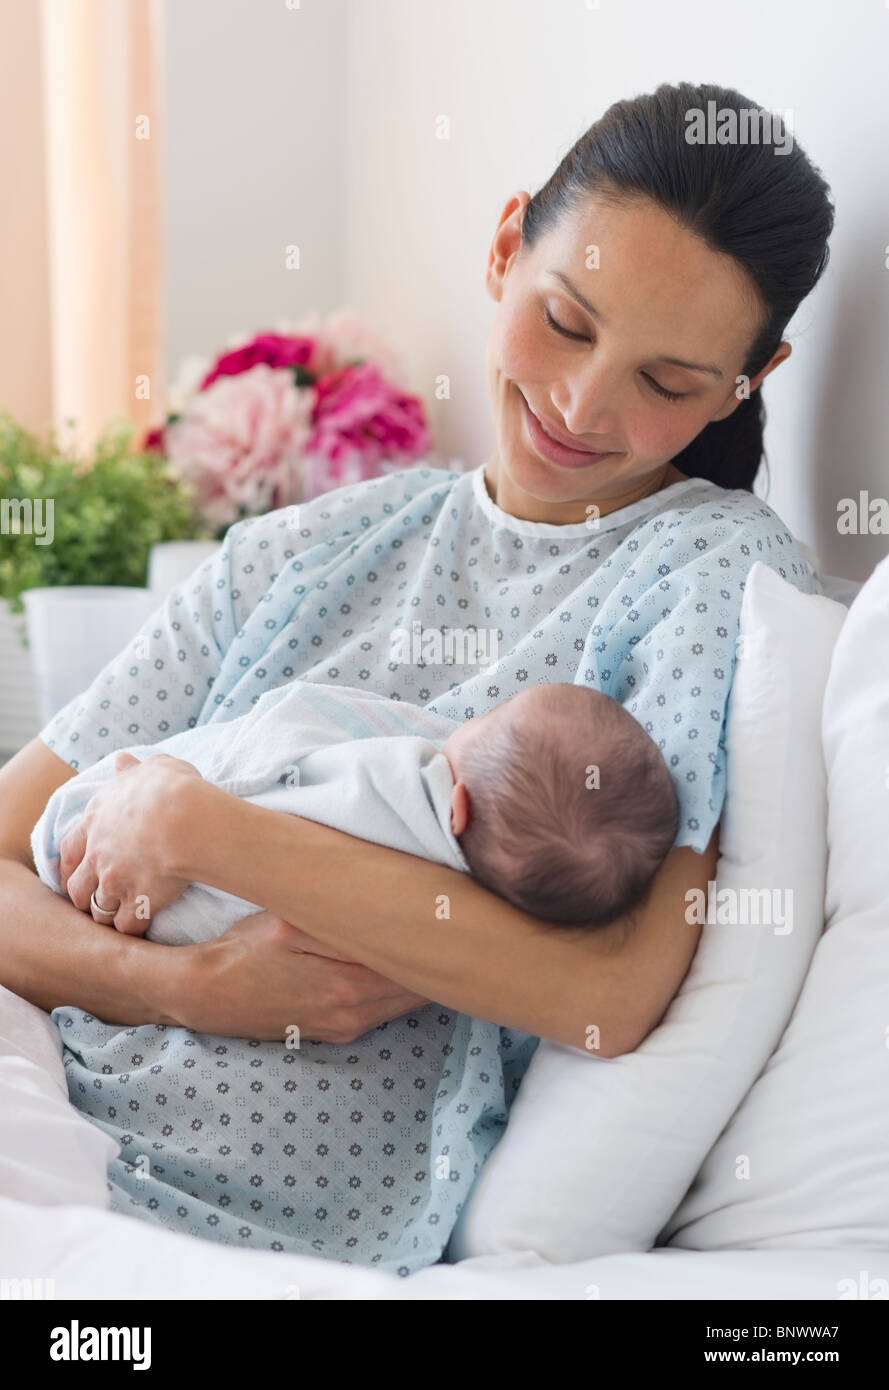 Mother holding newborn baby in hospital bed Banque D'Images